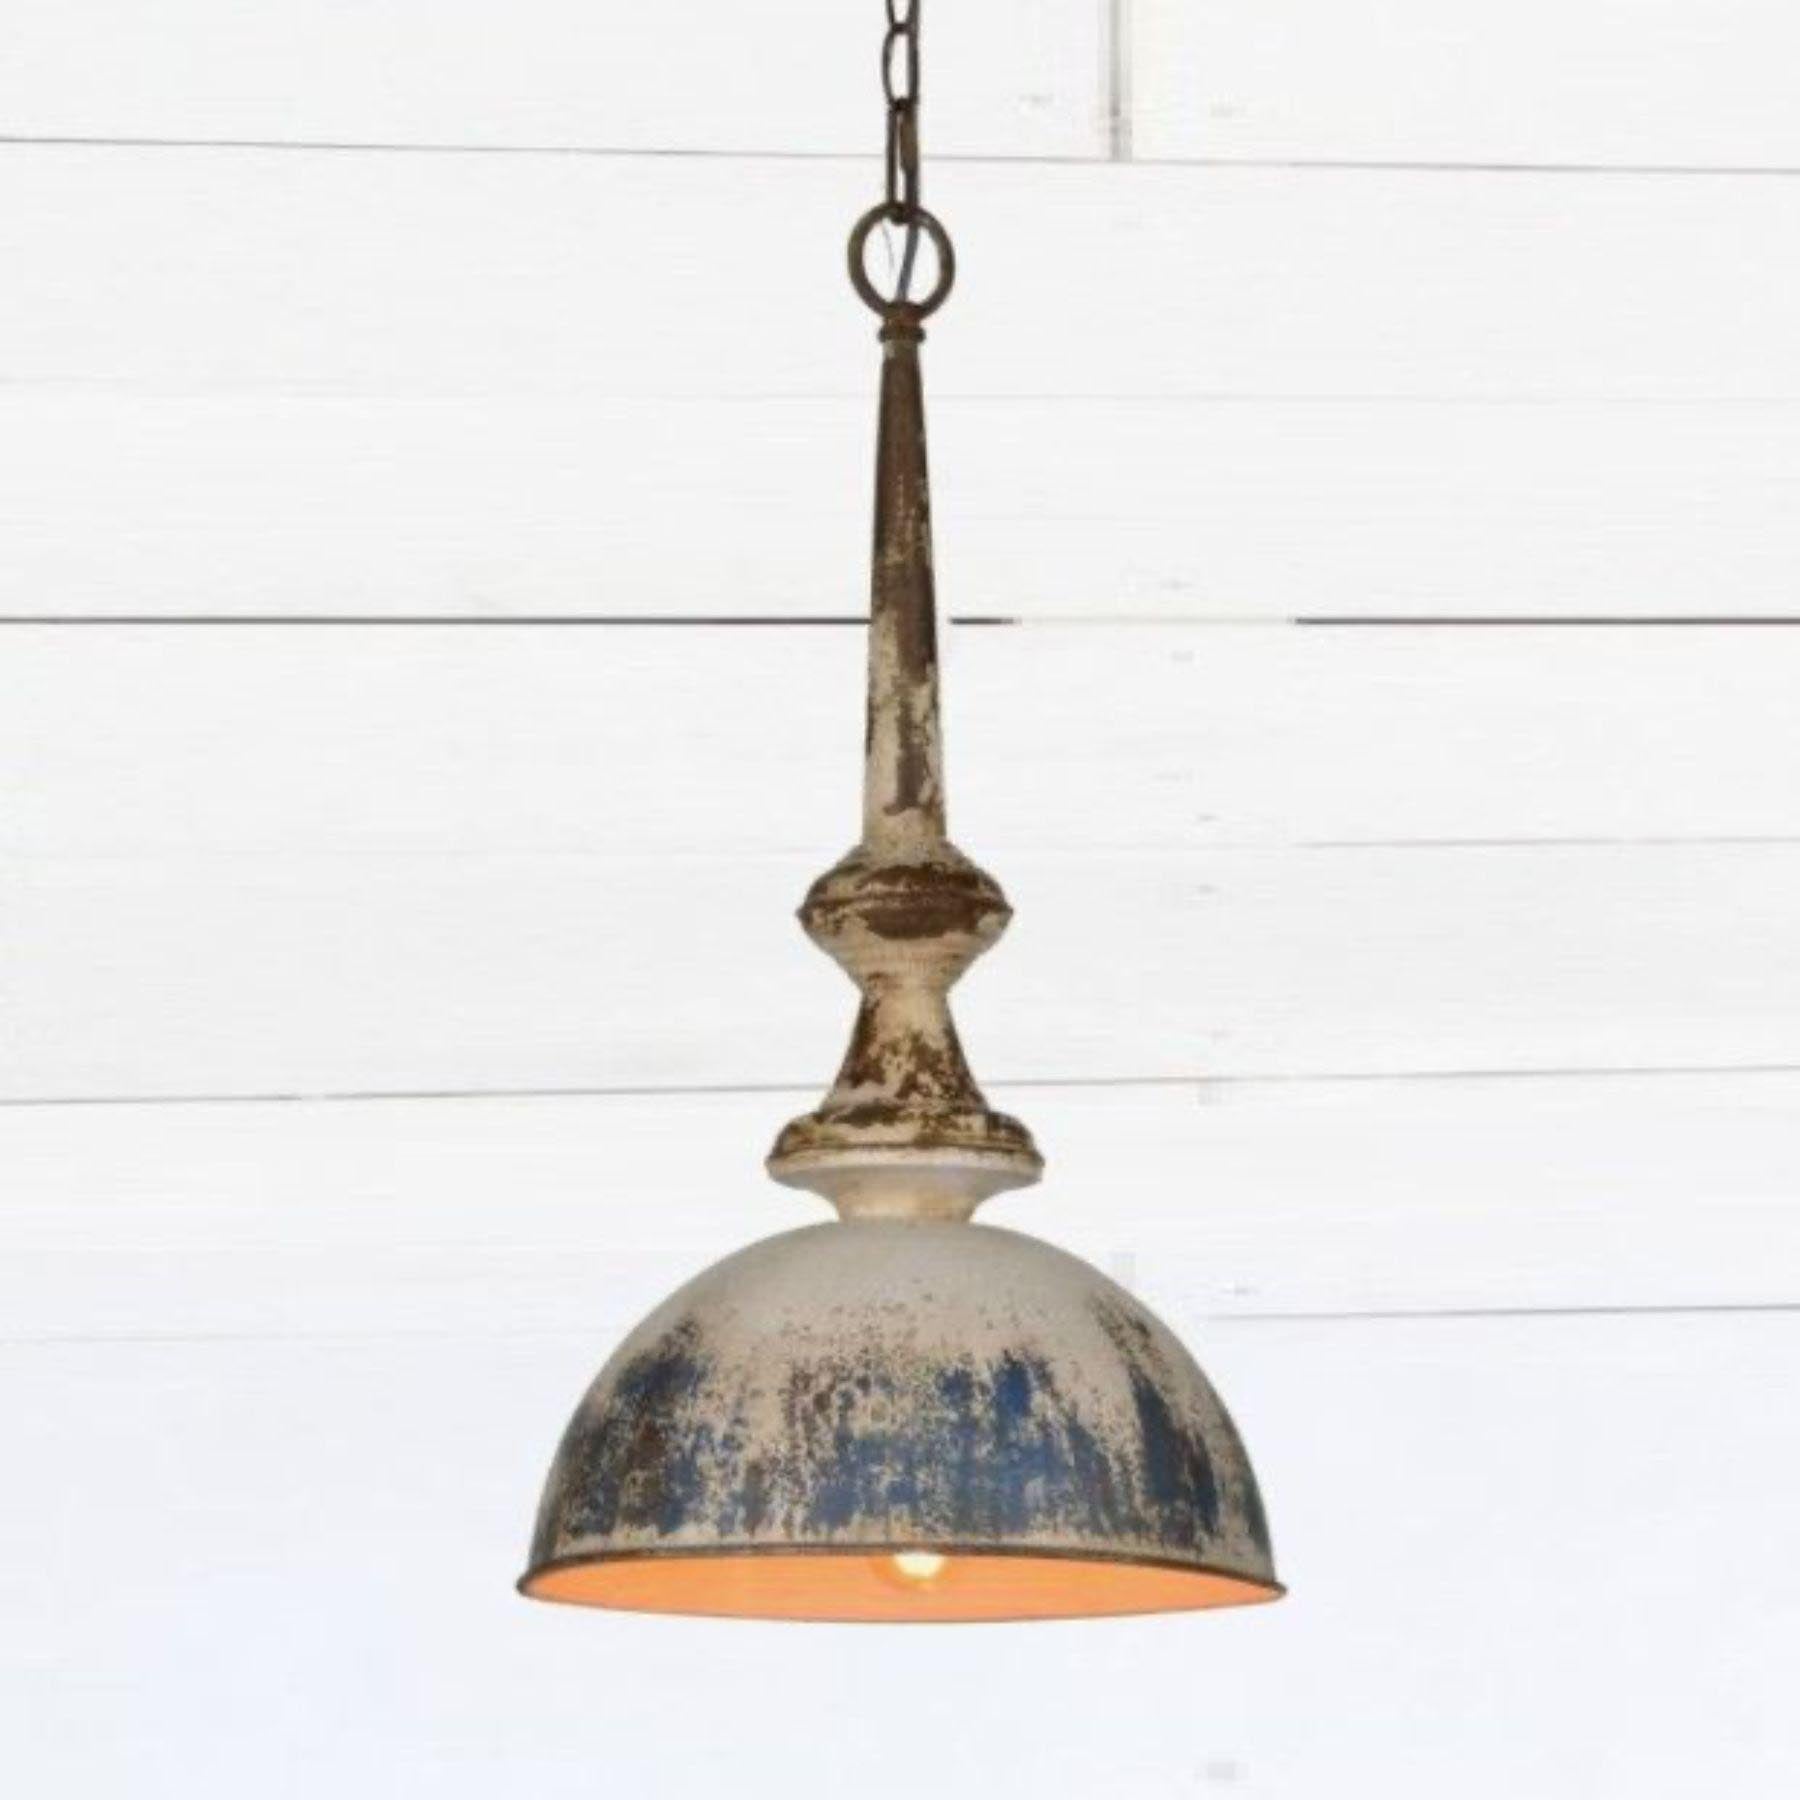 with design the pendant lamp will become the focal point radiating welcoming warmth